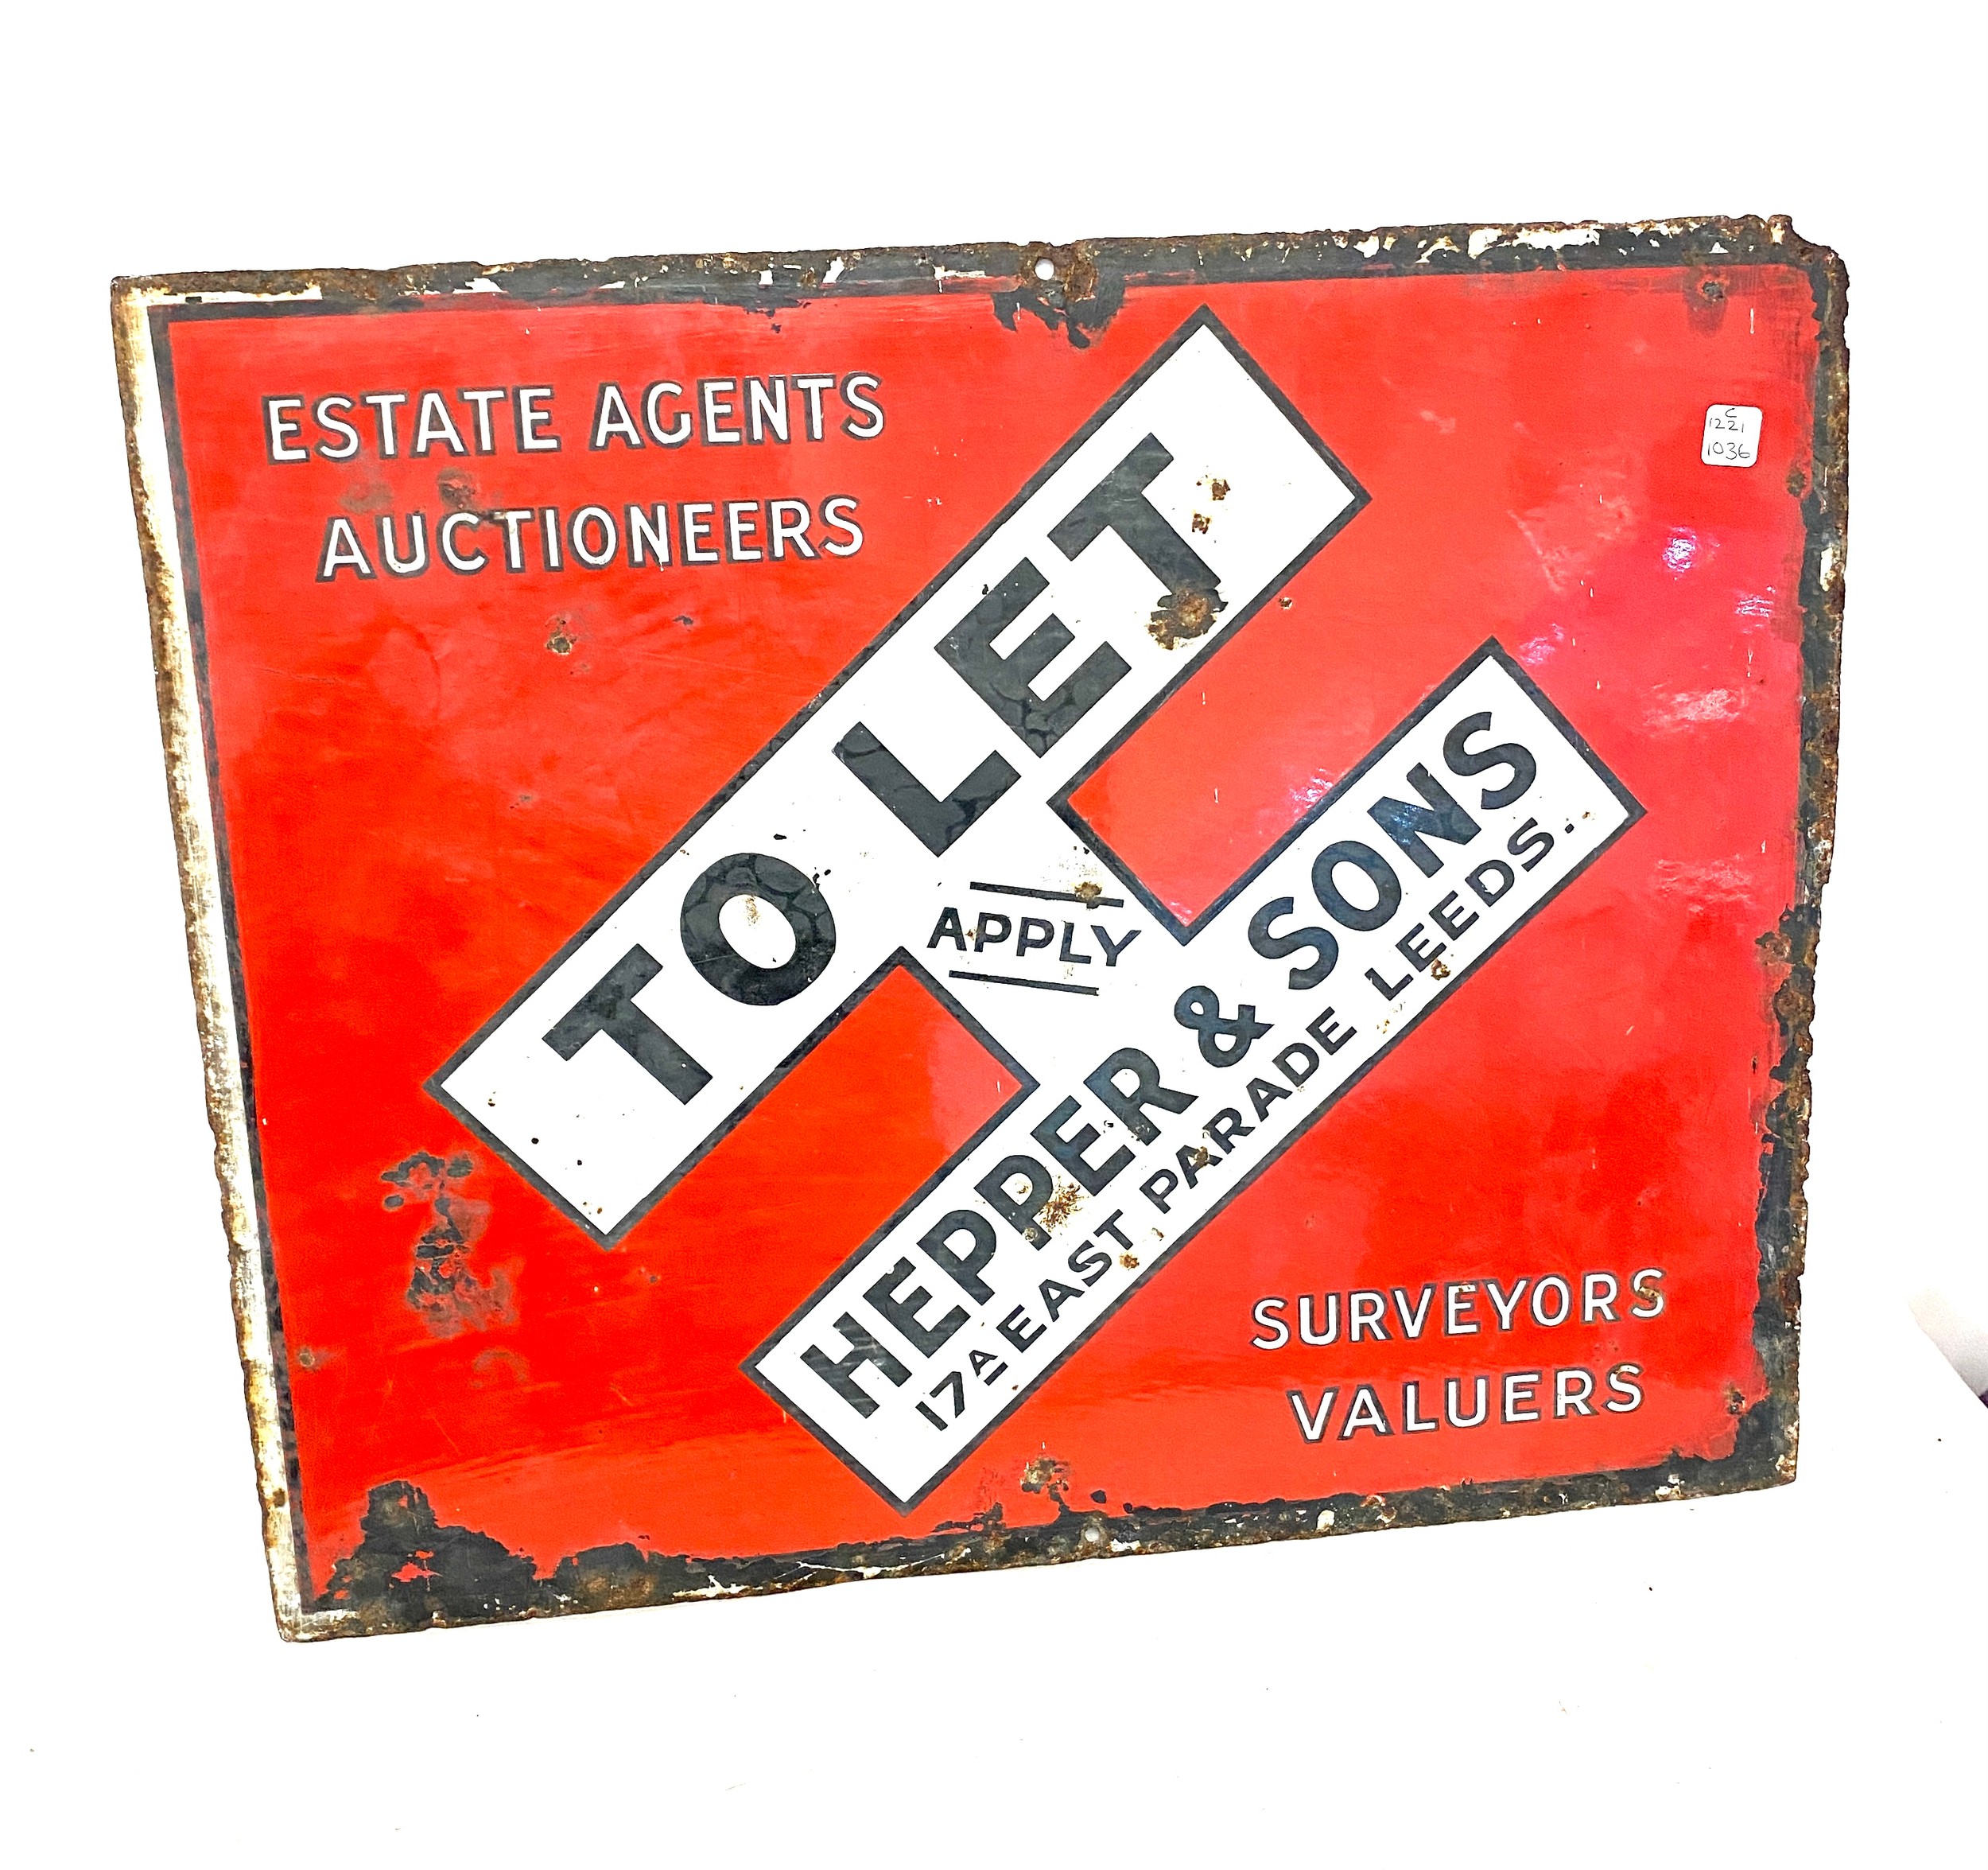 Vintage metal estate agent sign measures approx 22 inches by 18 inches - Image 2 of 3